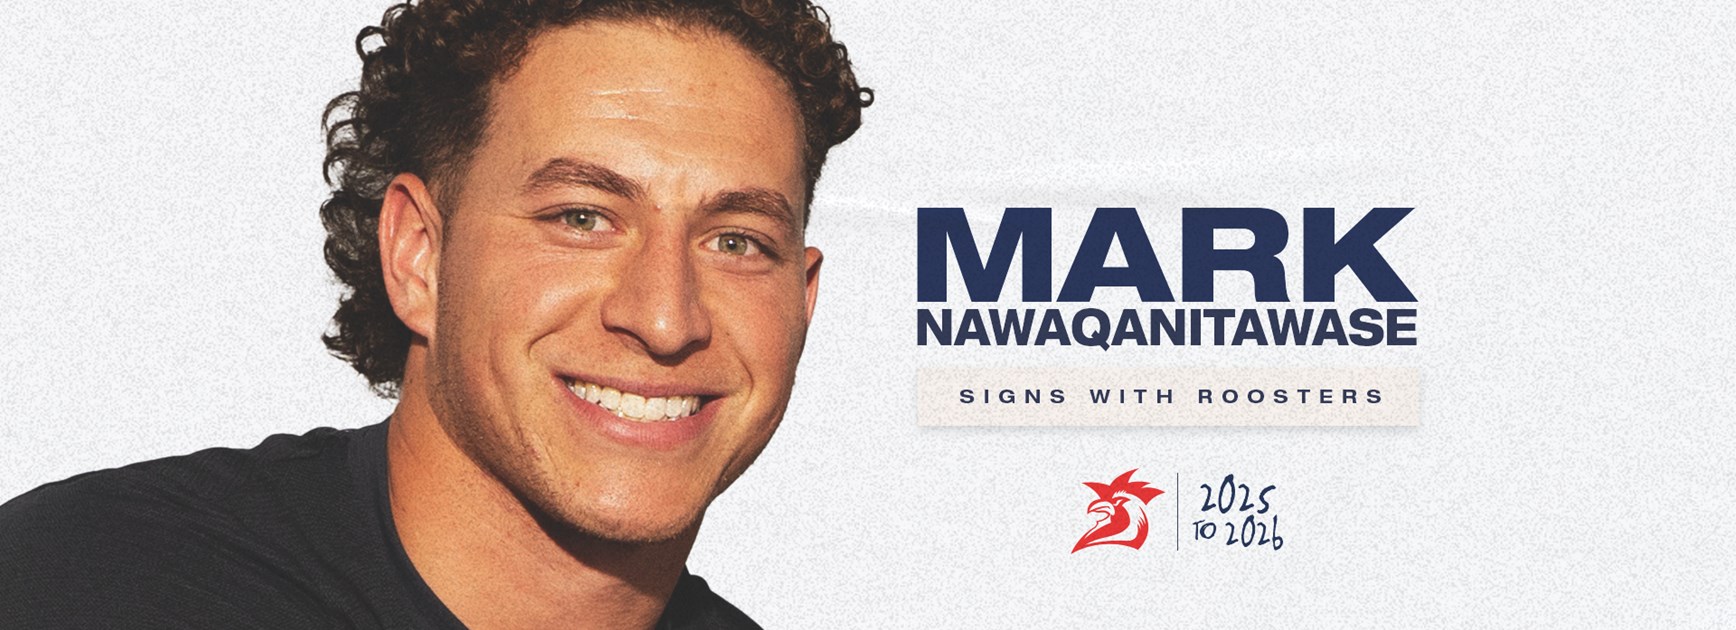 Mark Nawaqanitawase signs with Roosters